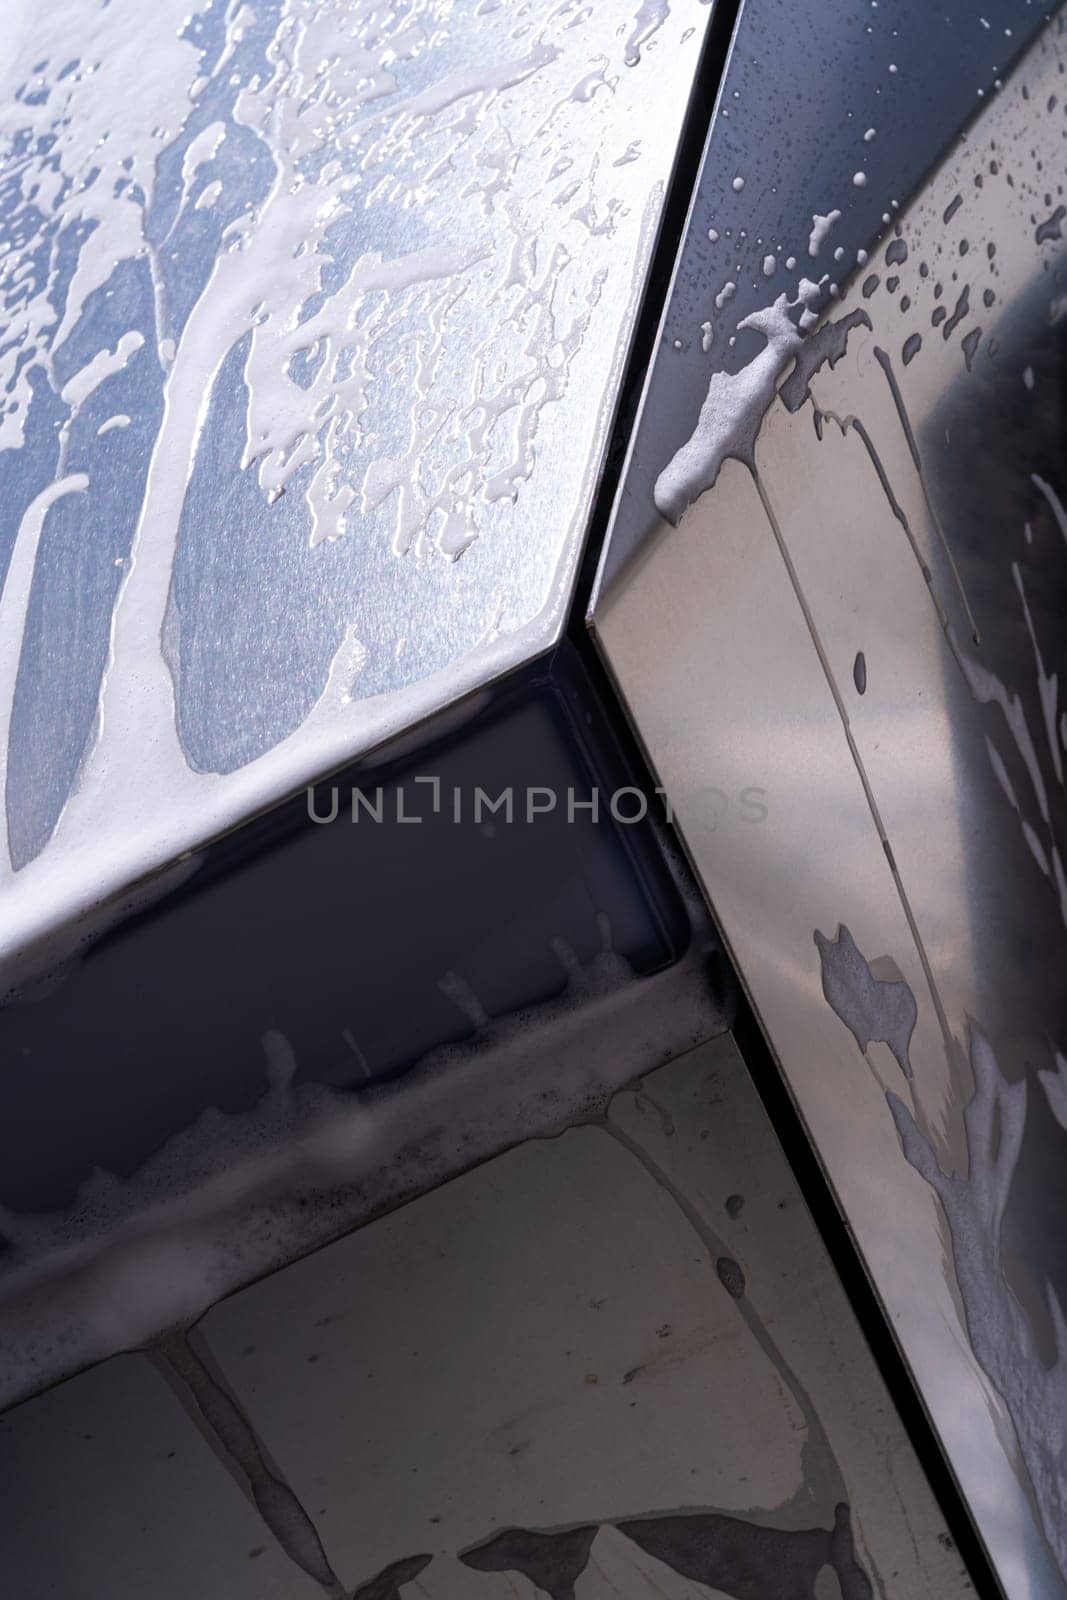 Denver, Colorado, USA-May 5, 2024-This image features a close-up view of the Tesla Cybertruck wheel and angular body design covered in soap and water during a thorough car wash, highlighting the unique textures and robust details of the electric truck.